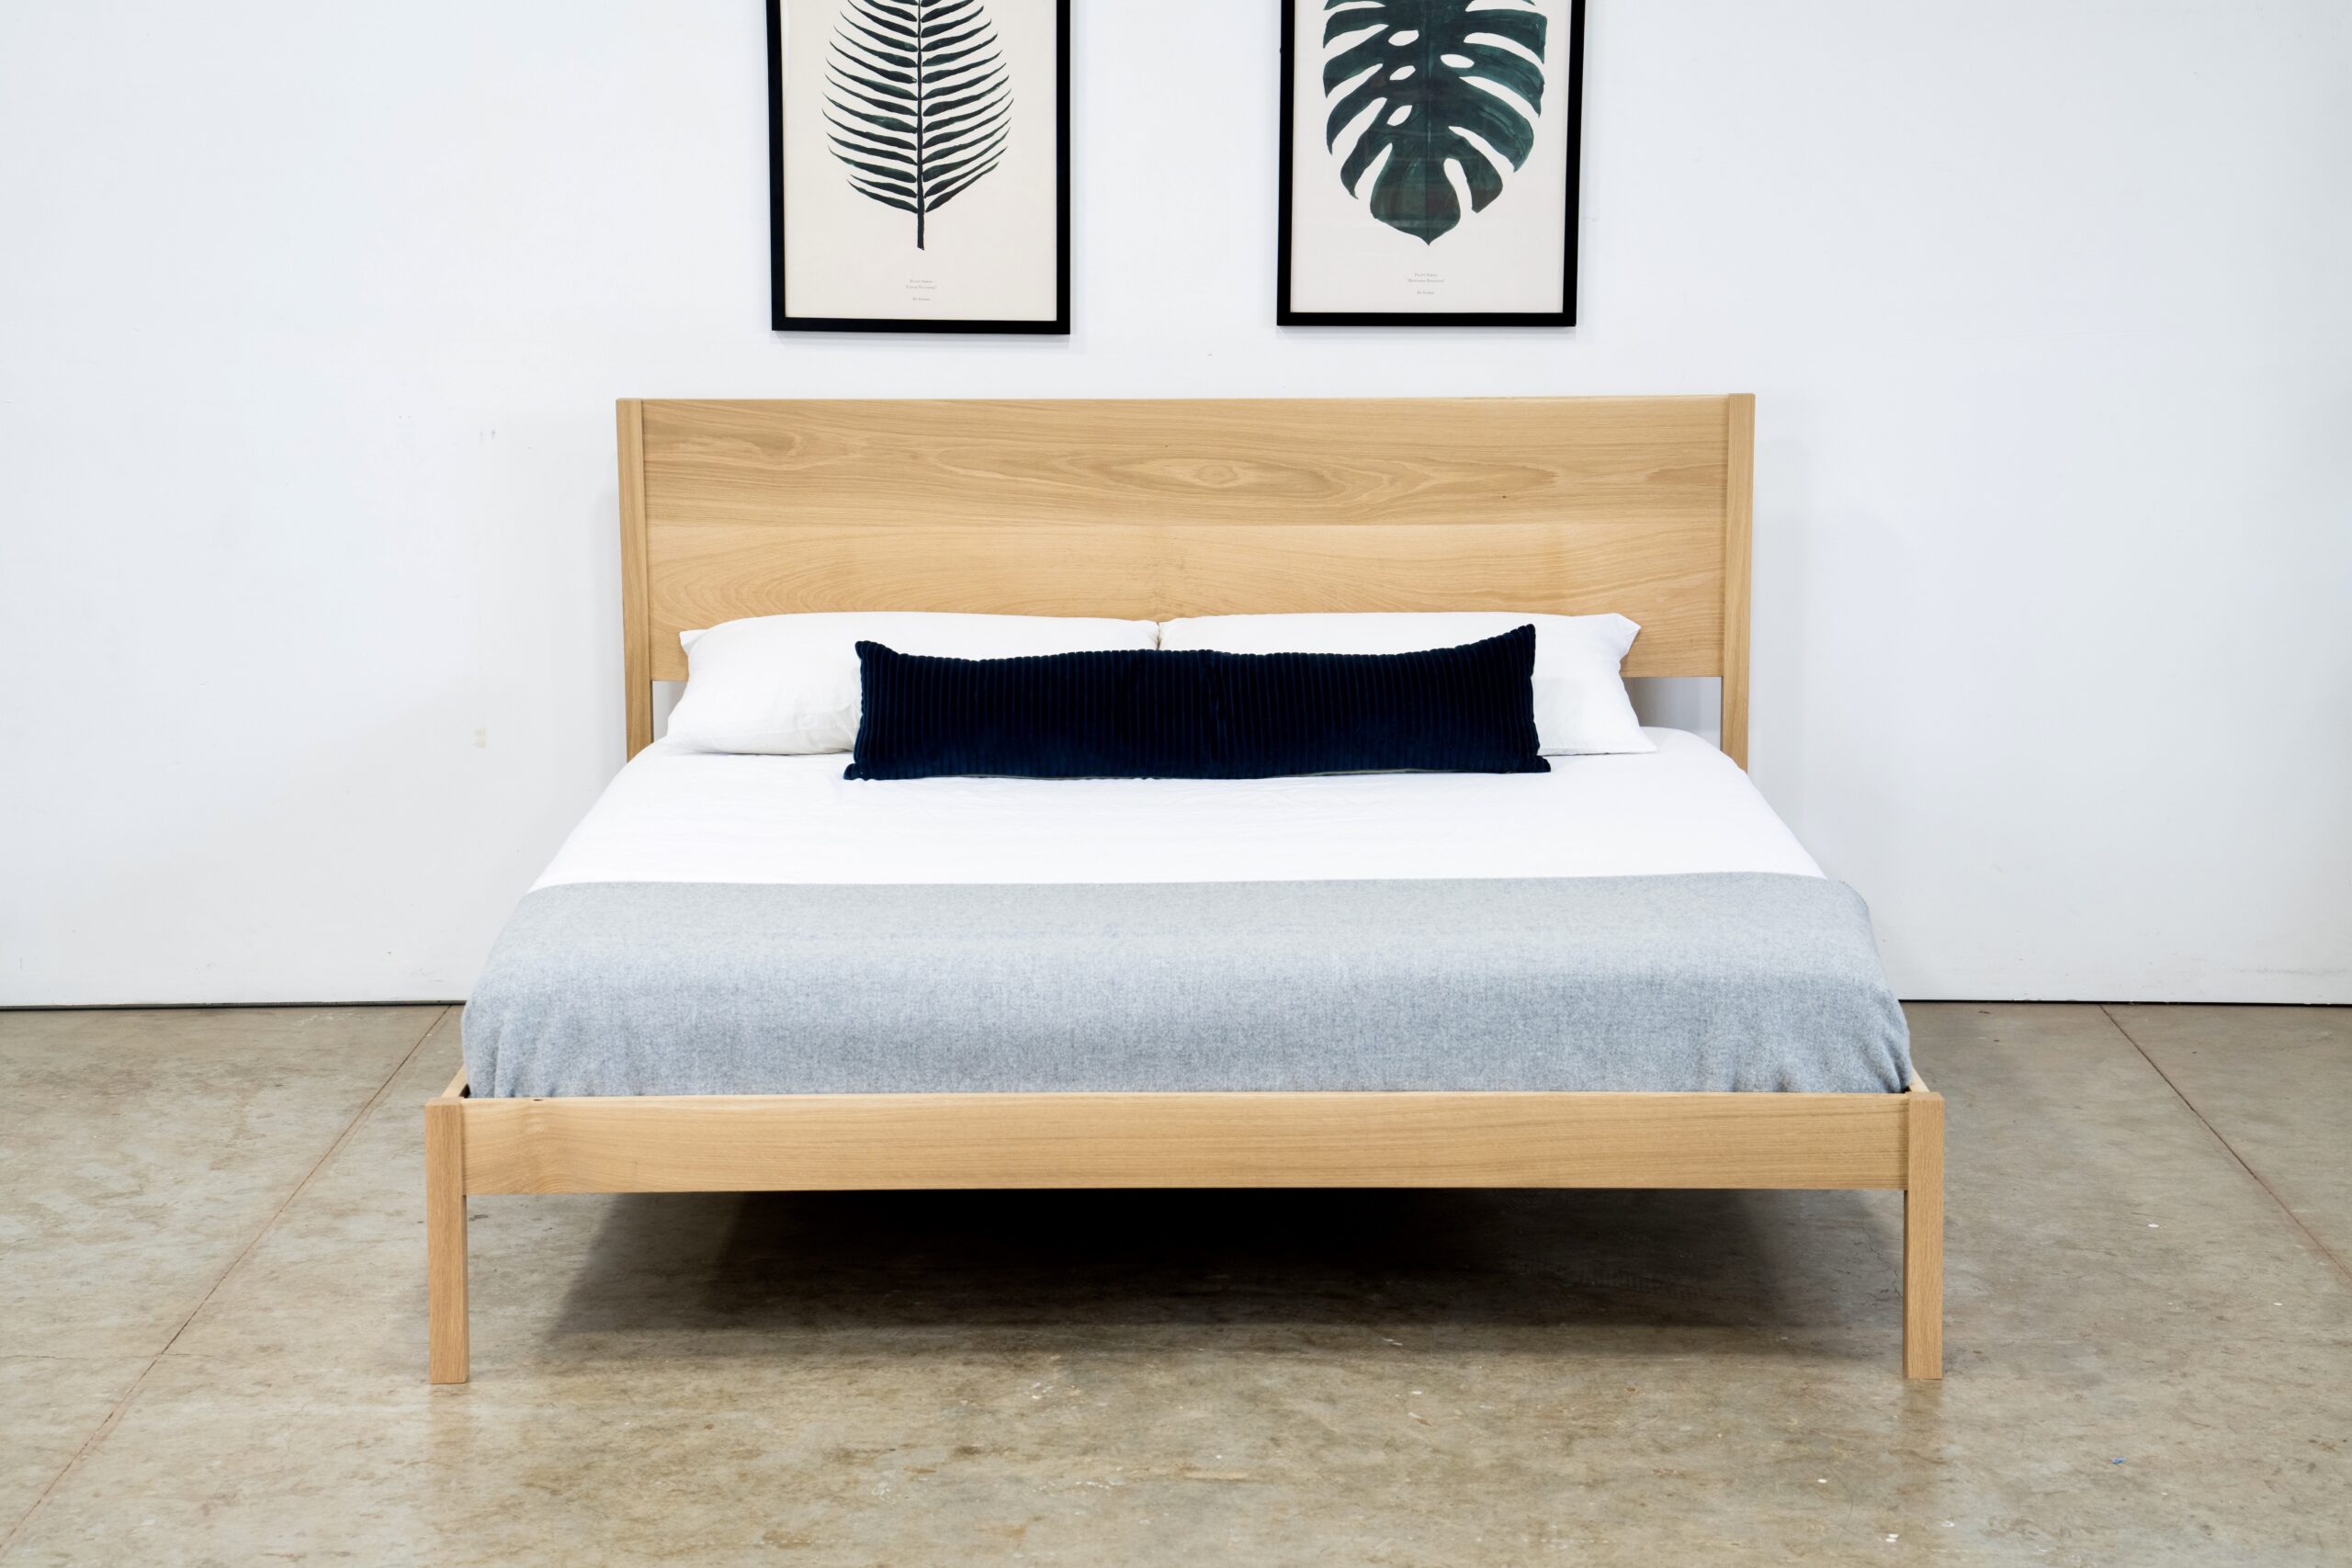 A simple platform bed in white oak with a mattress and pillows.